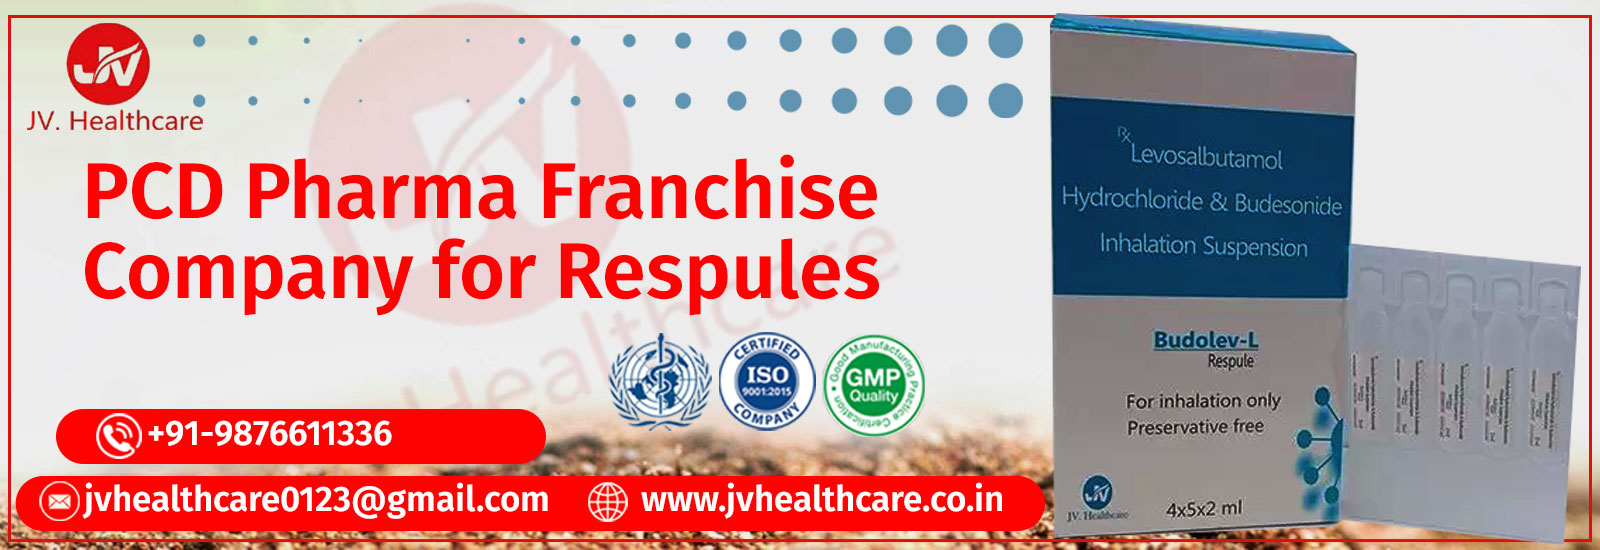 PCD Pharma Franchise For Respules in India